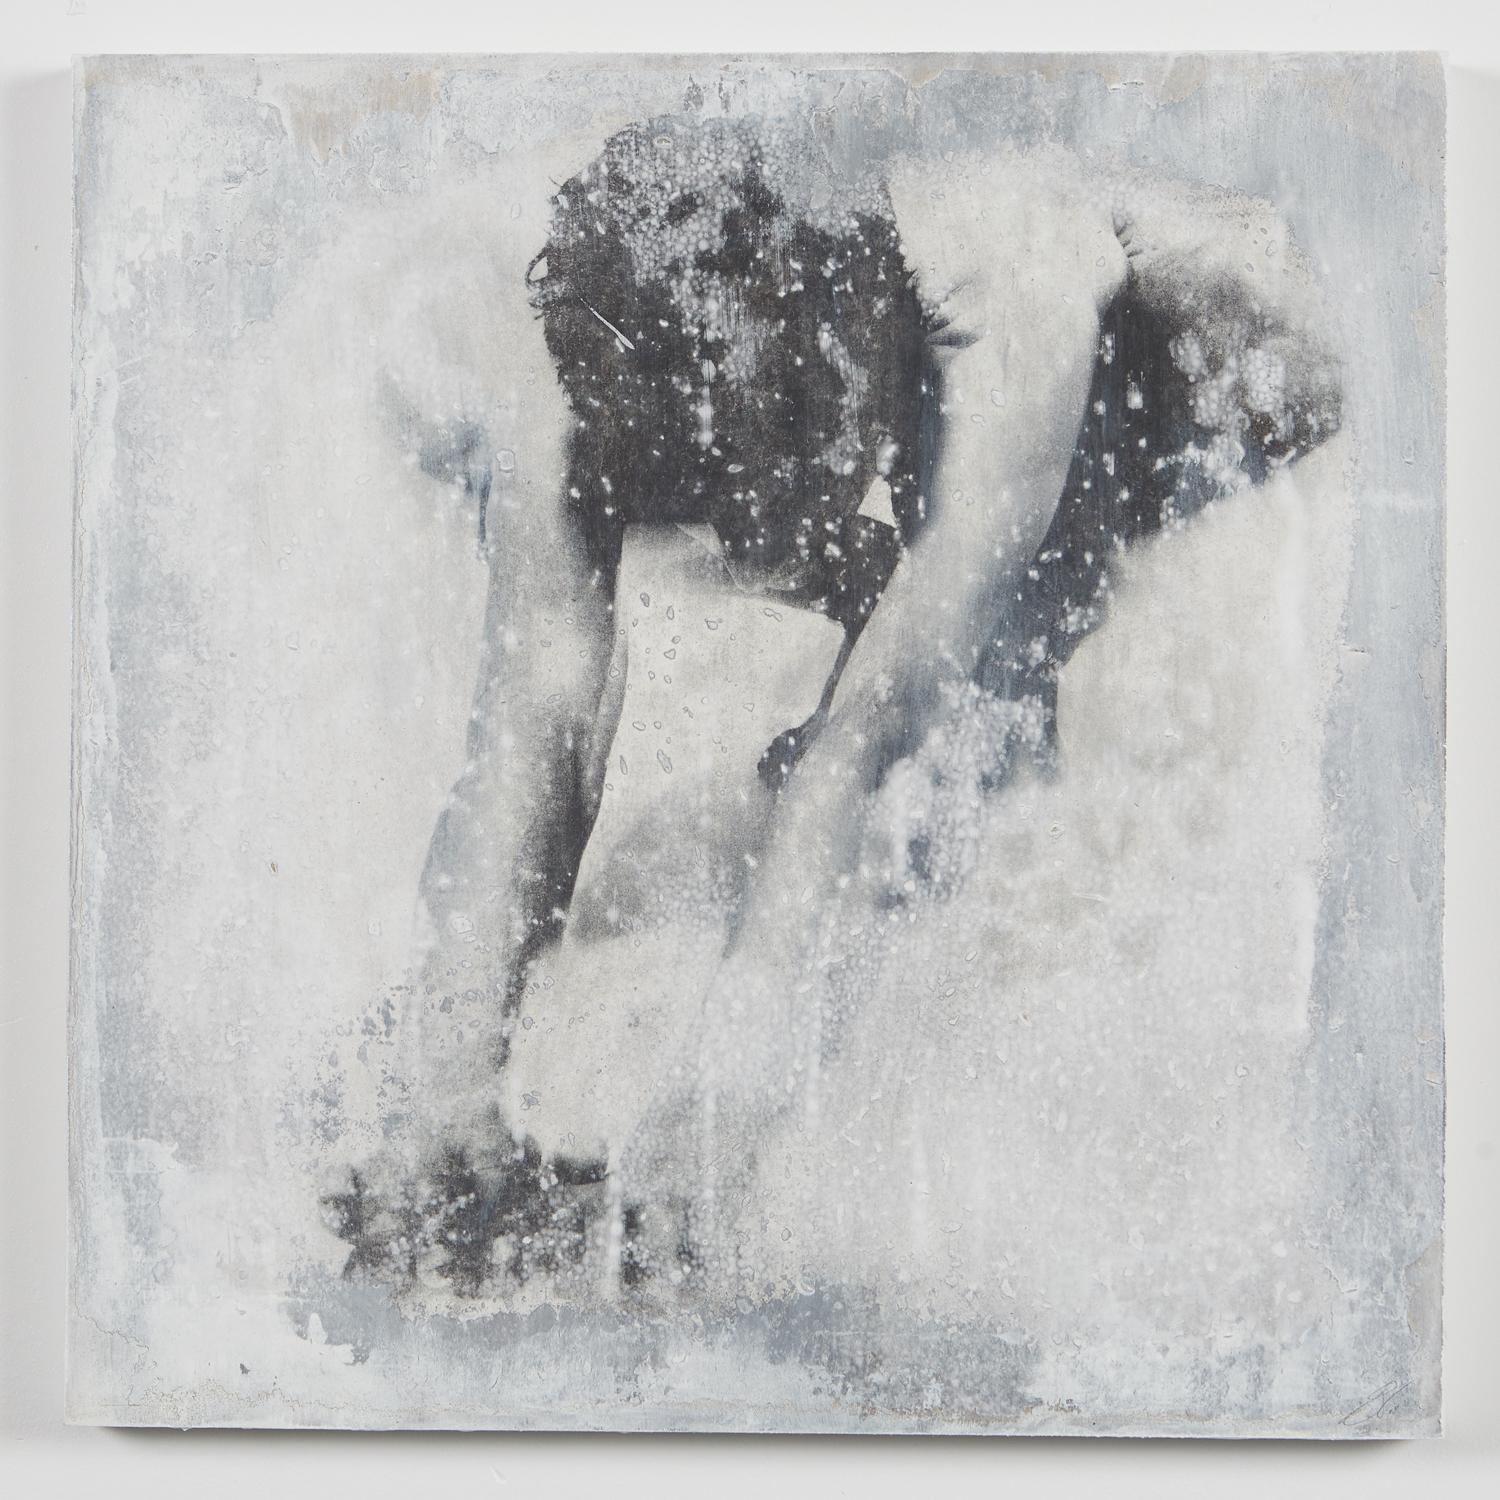 “Untitled: Movement 1” by Ben Cope
2019
Photo on deconstructed paper on wood panel with oils and paint pigments 
24” X 24” inch

Ben Cope is a Georgia native graduating from Columbus State University with a BFA in ceramic sculpture and photography.